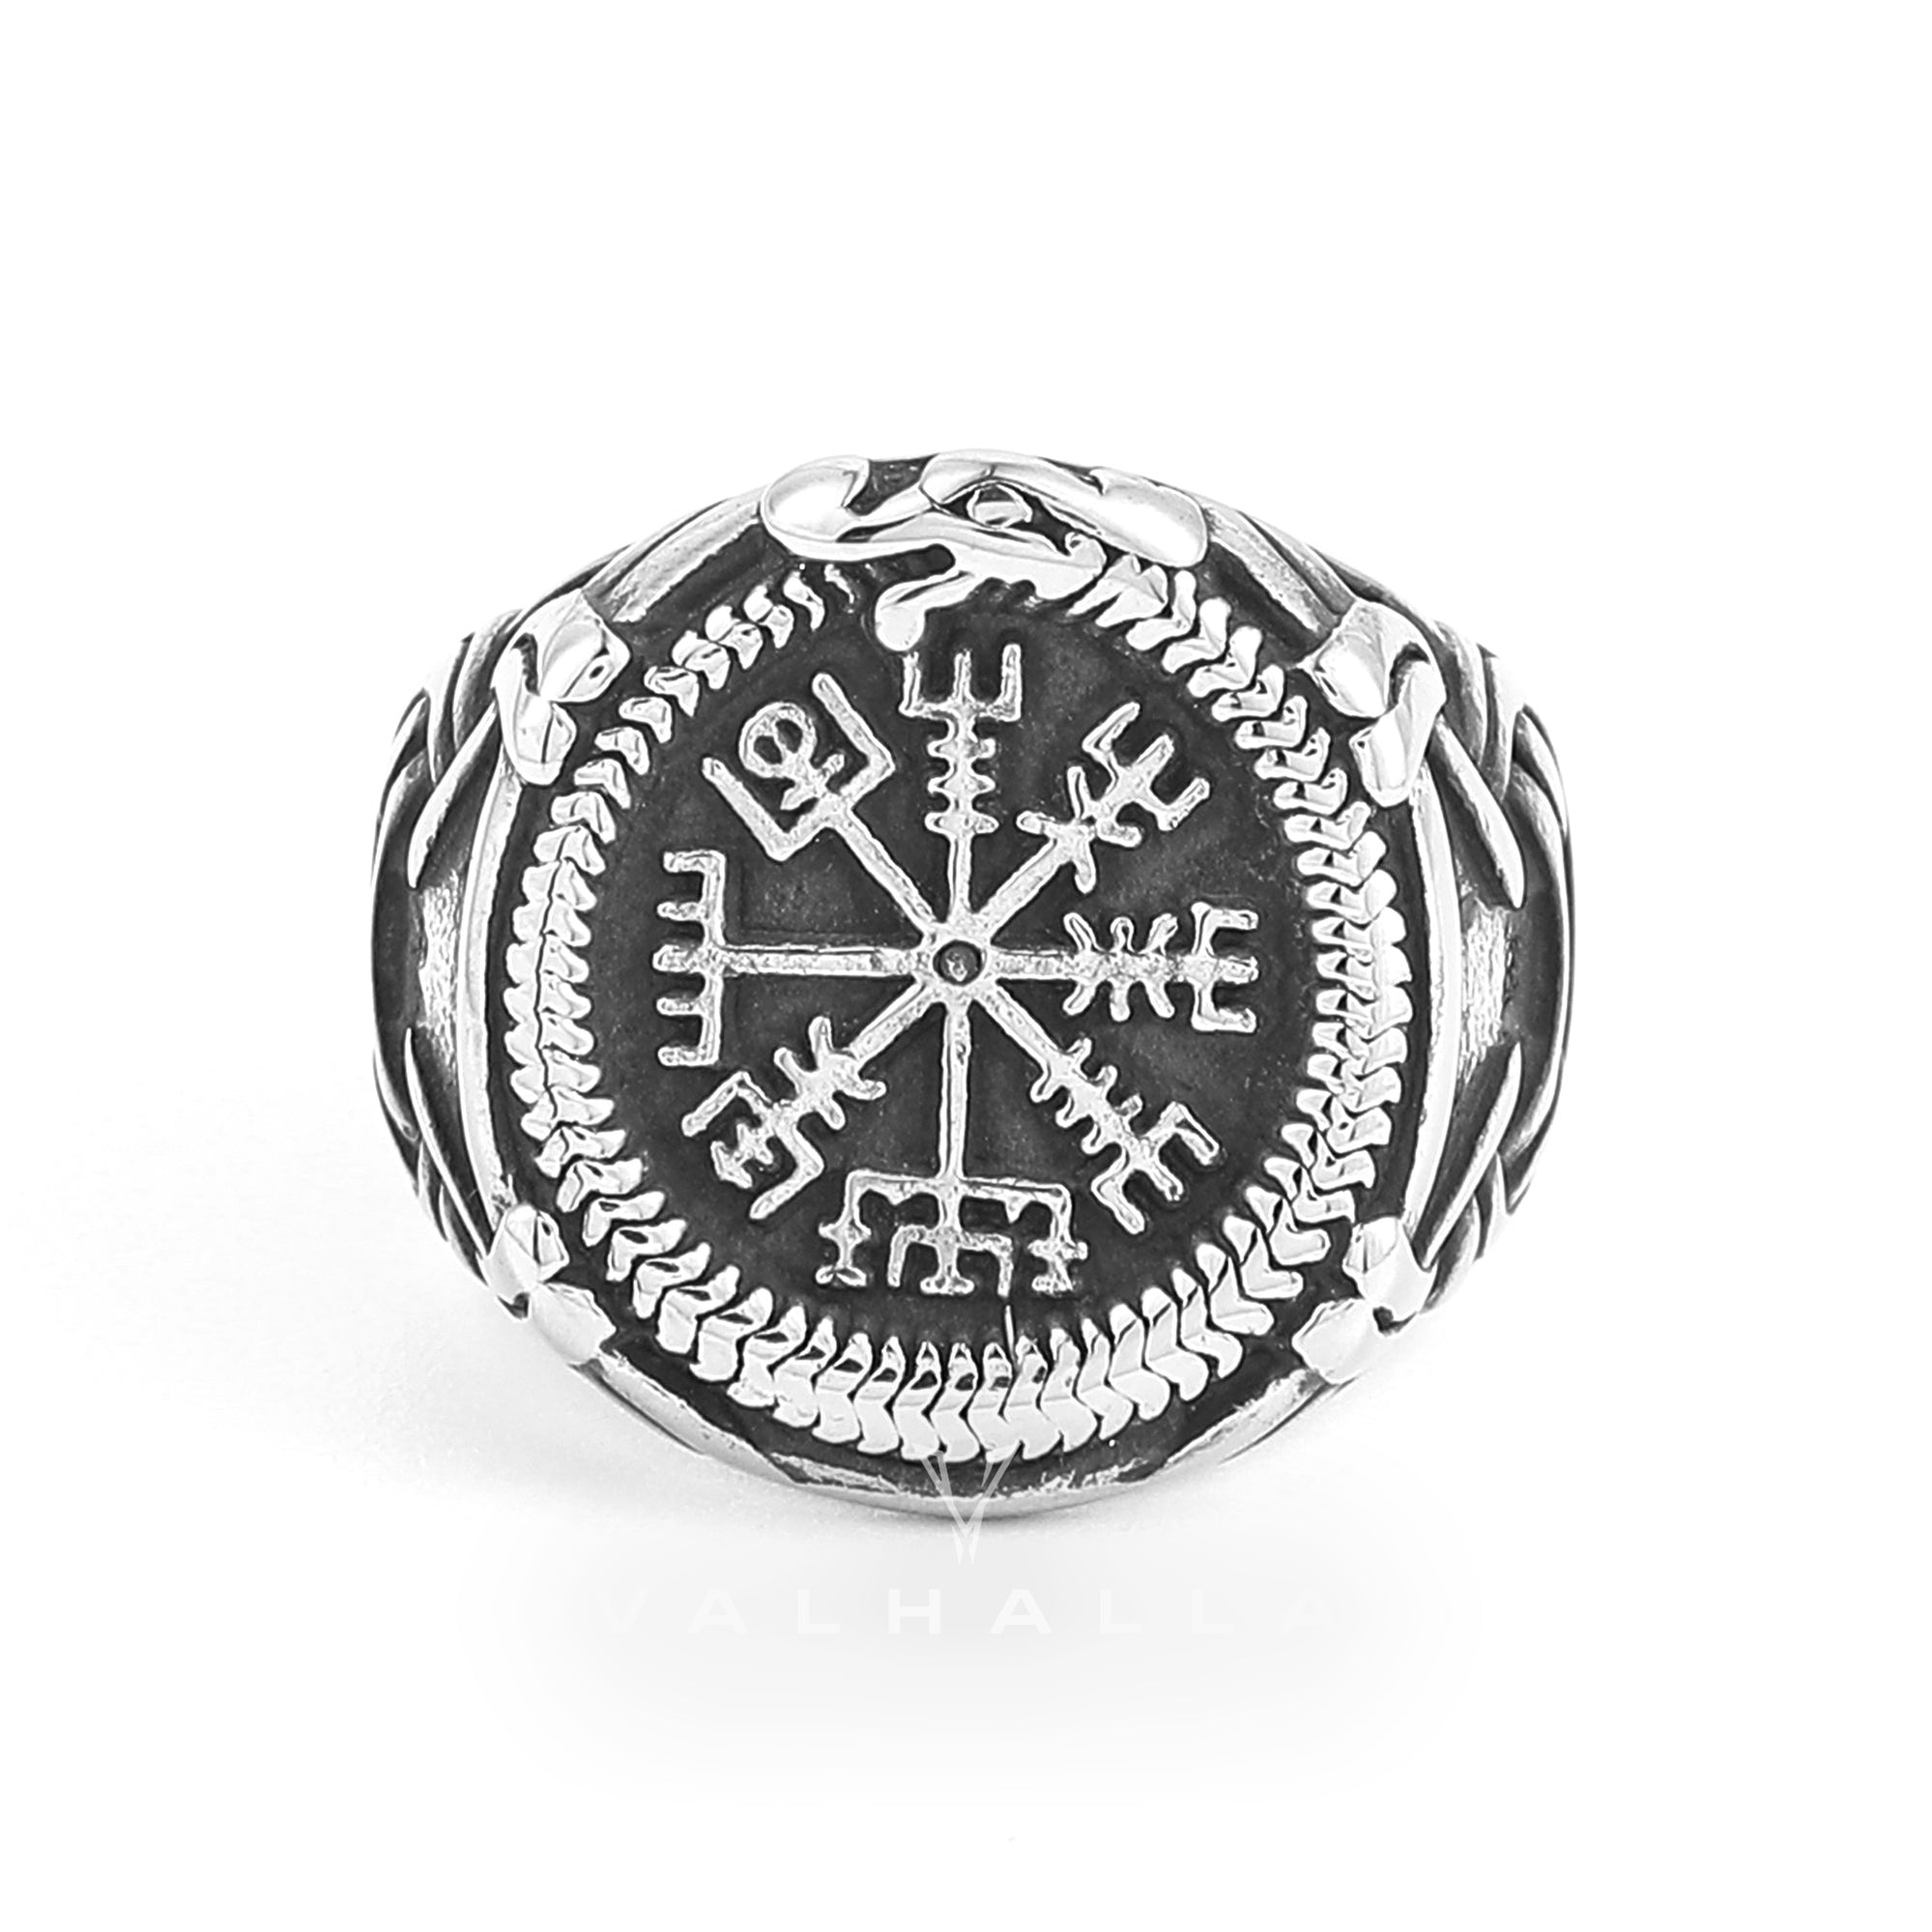 Handcrafted Stainless Steel Vegvisir and Jormungand Ring